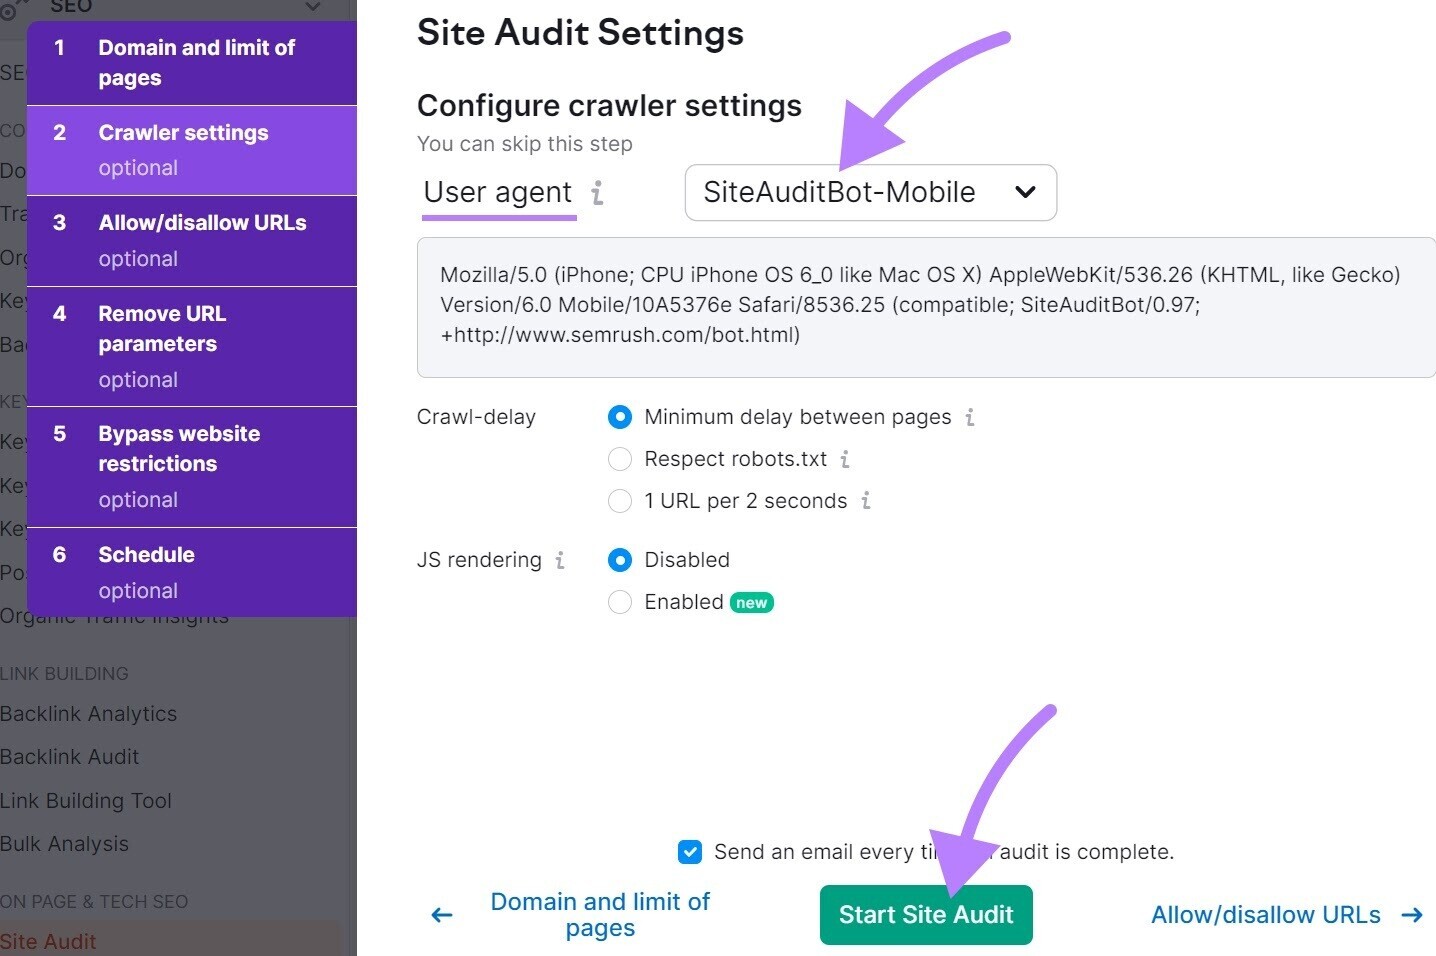 "Configure crawler settings" section in Site Audit Settings